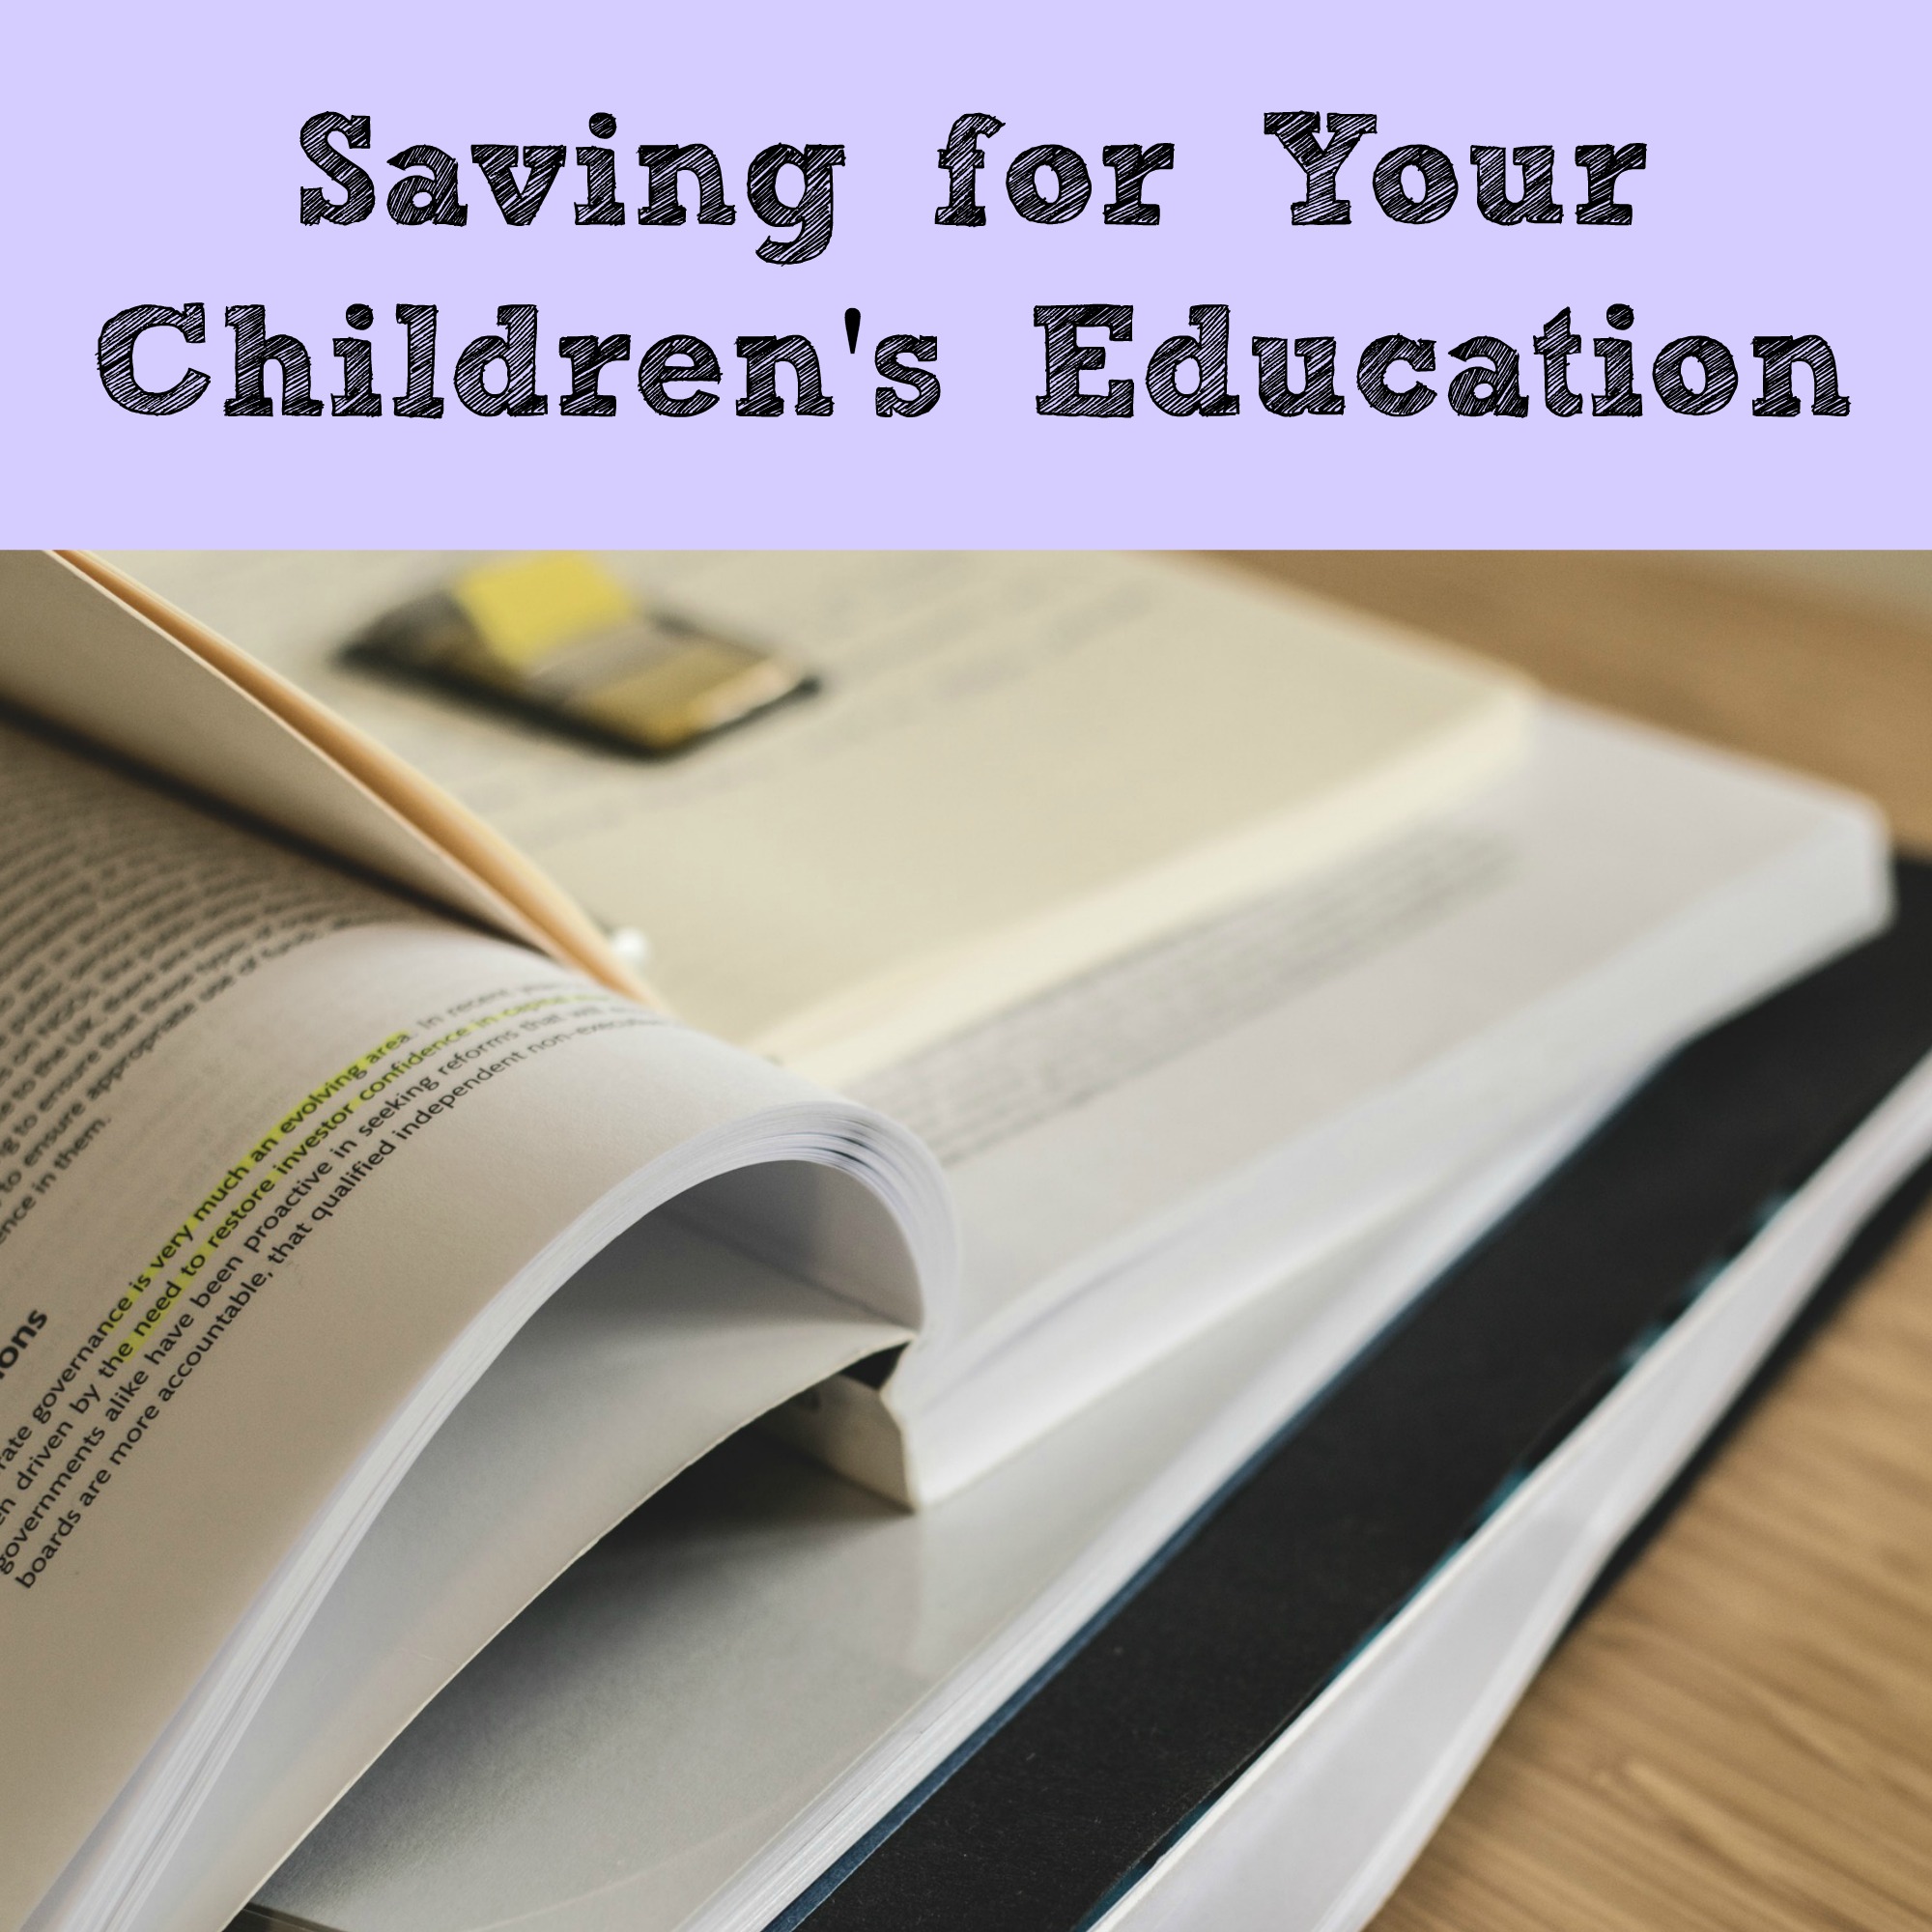 Saving for your Children's Education